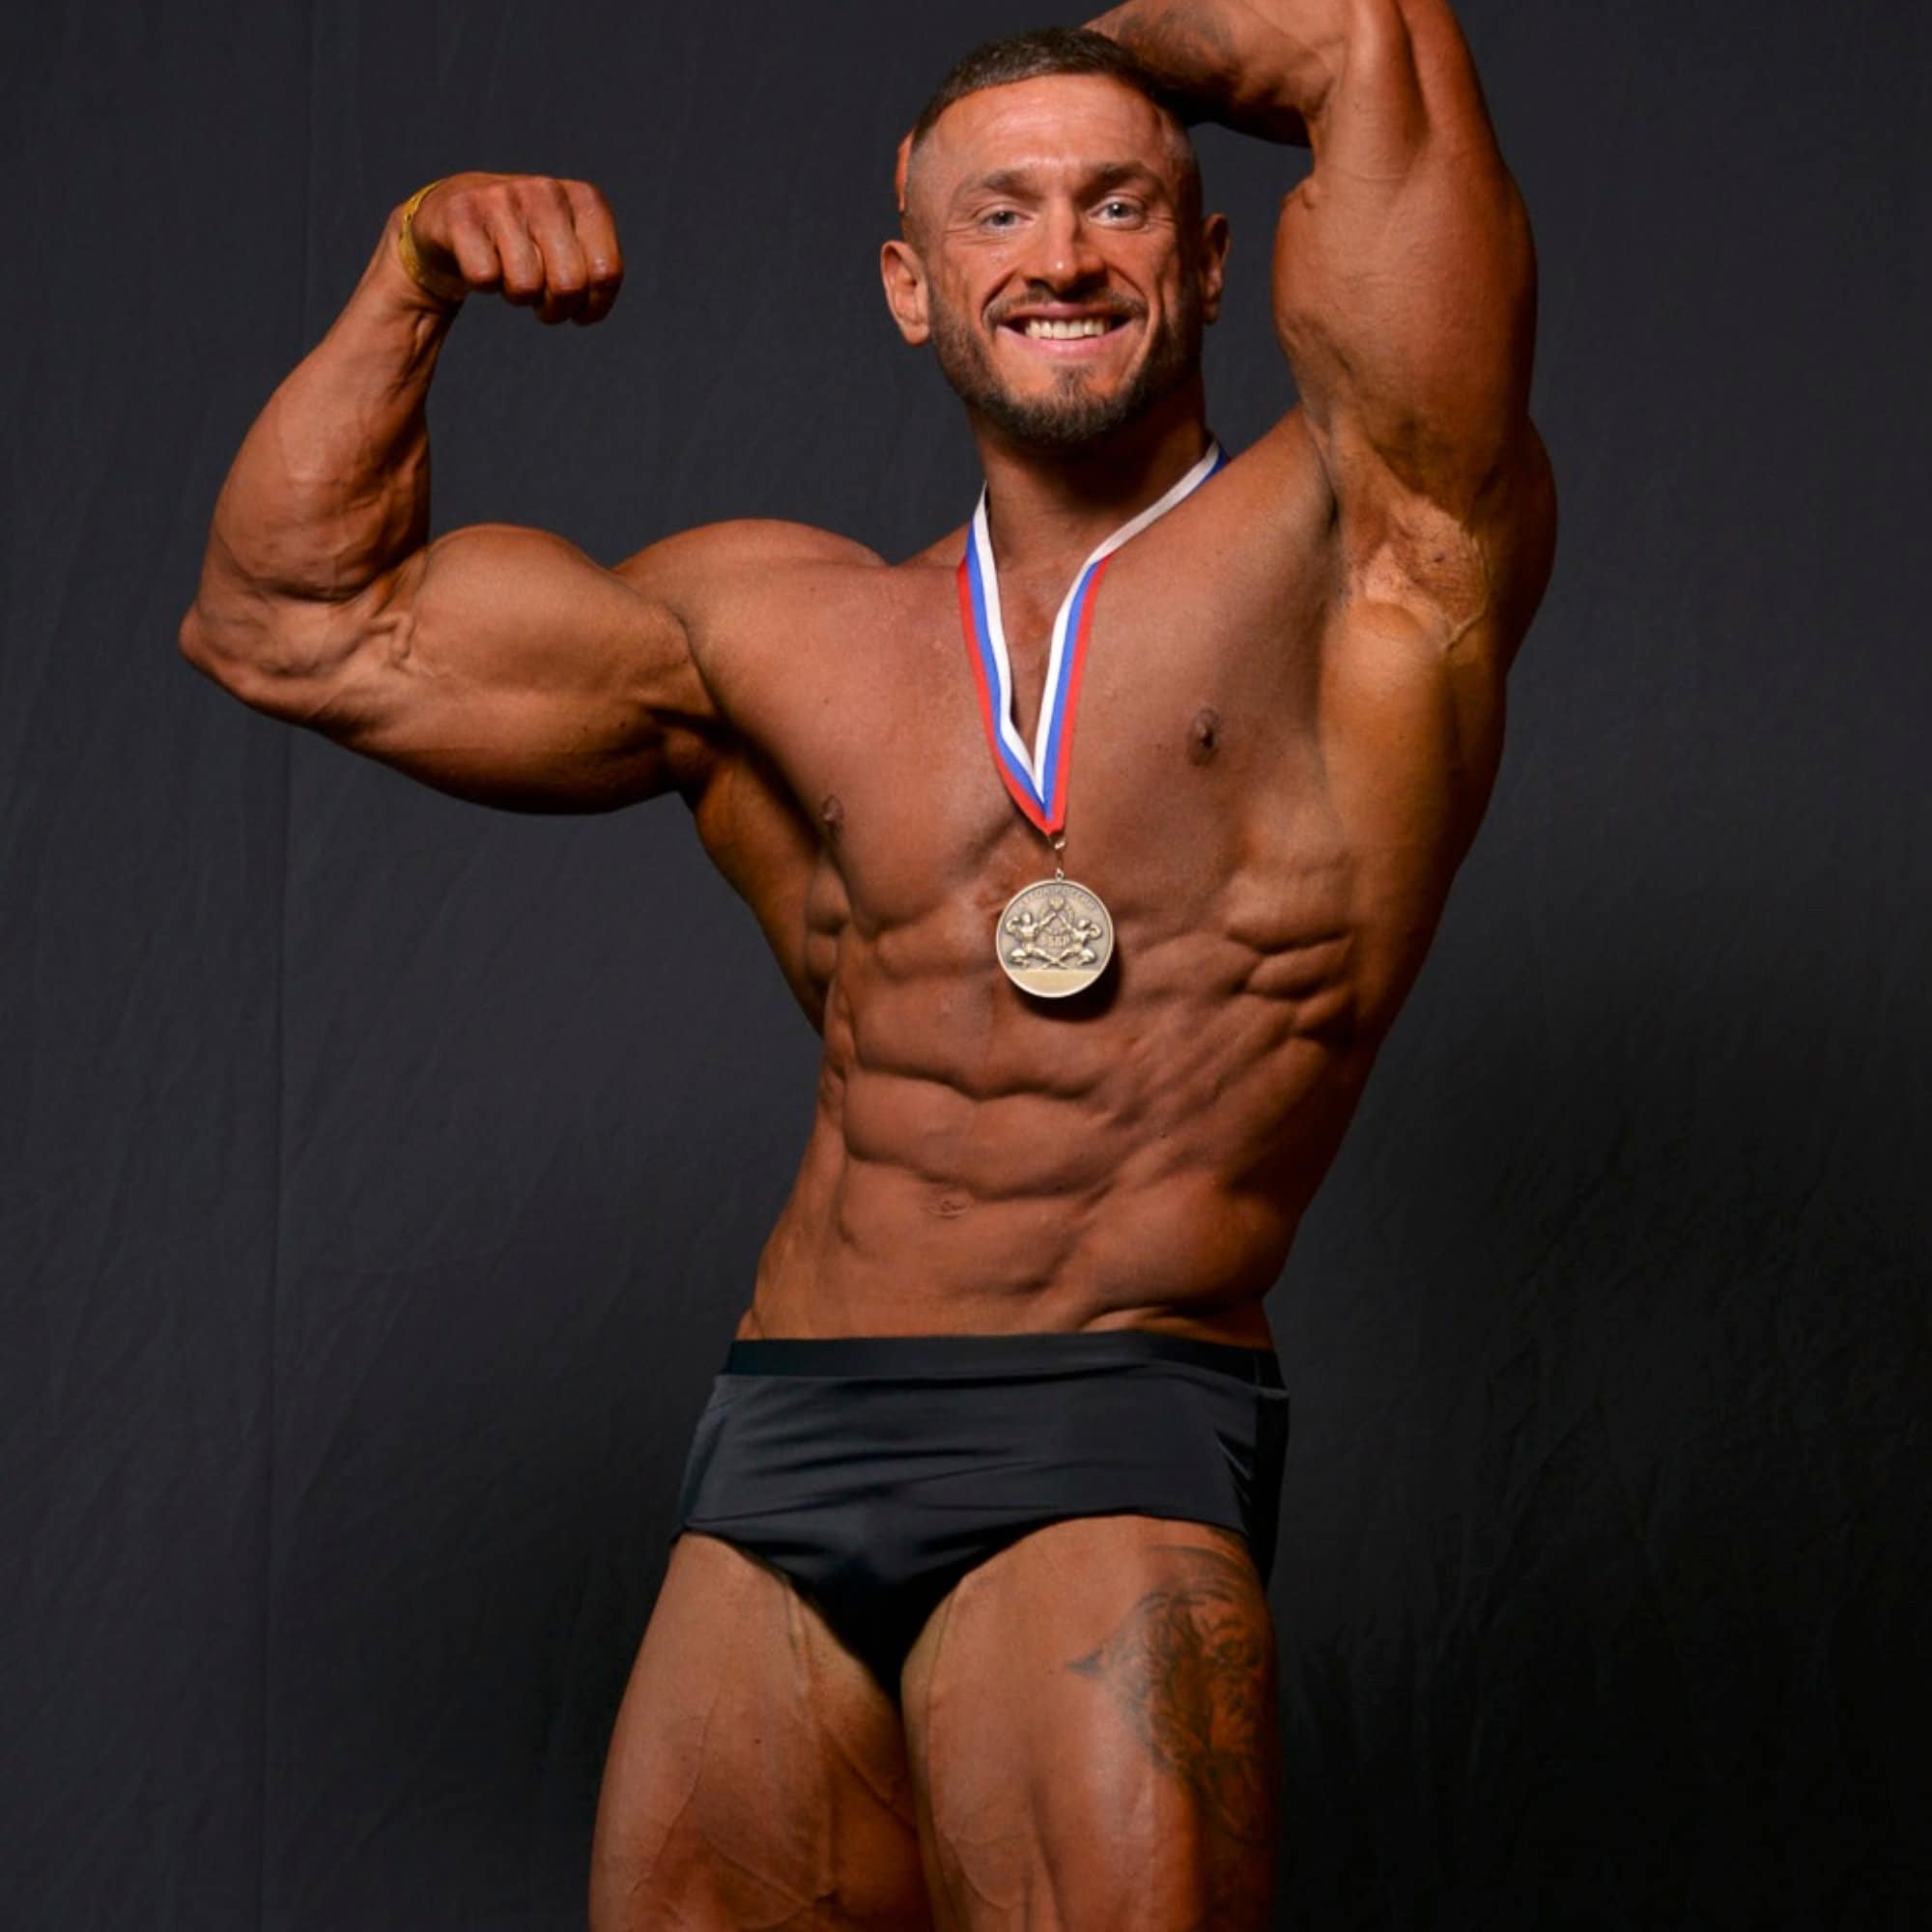 Muscle Alive Mens Bodybuilding Competition Posing Trunks Nylon and Spandex